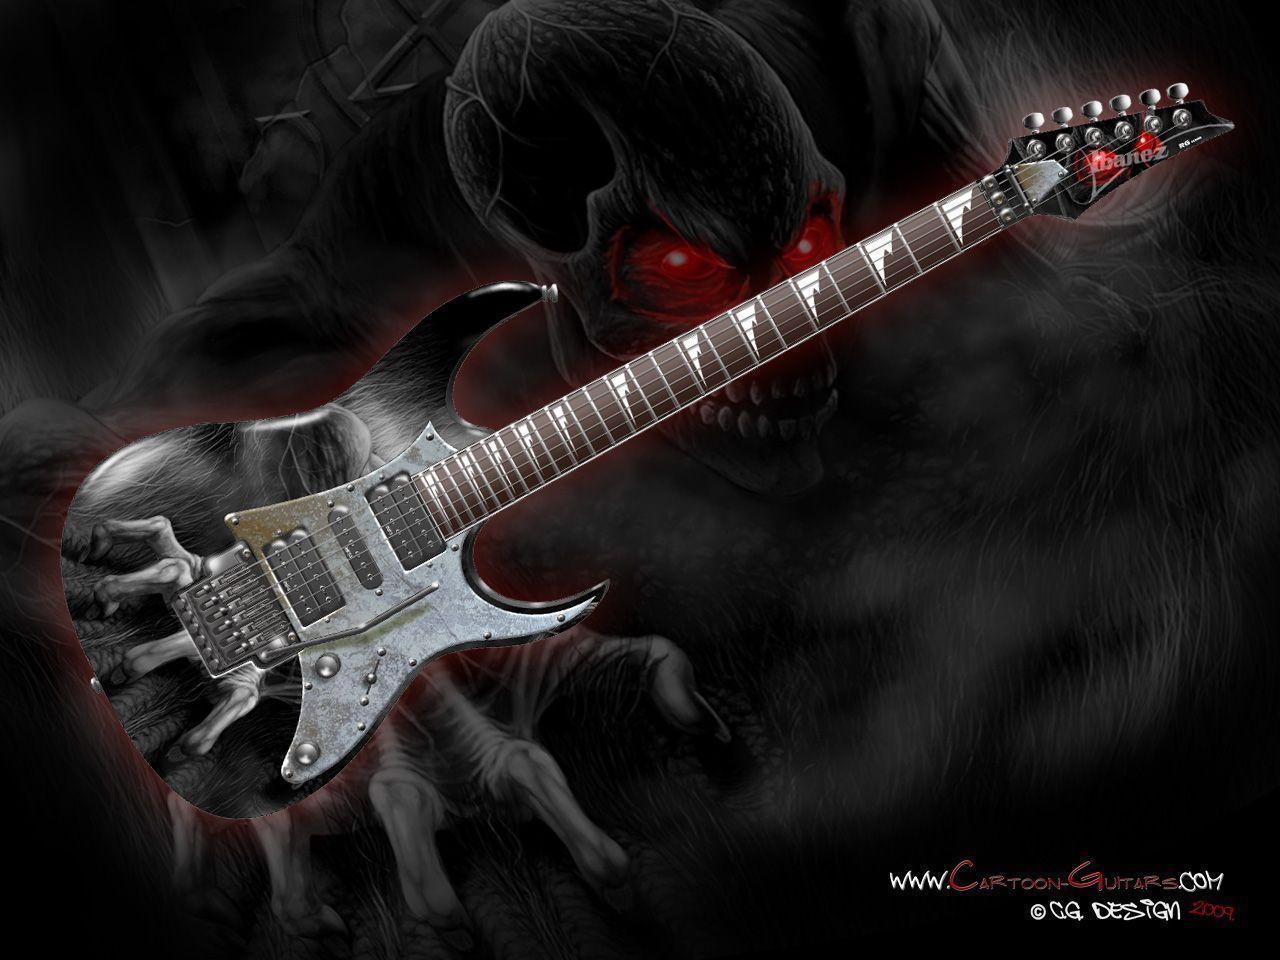 Awesome Bass Guitar Wallpaper High Quality 43384 HD Picture. Top